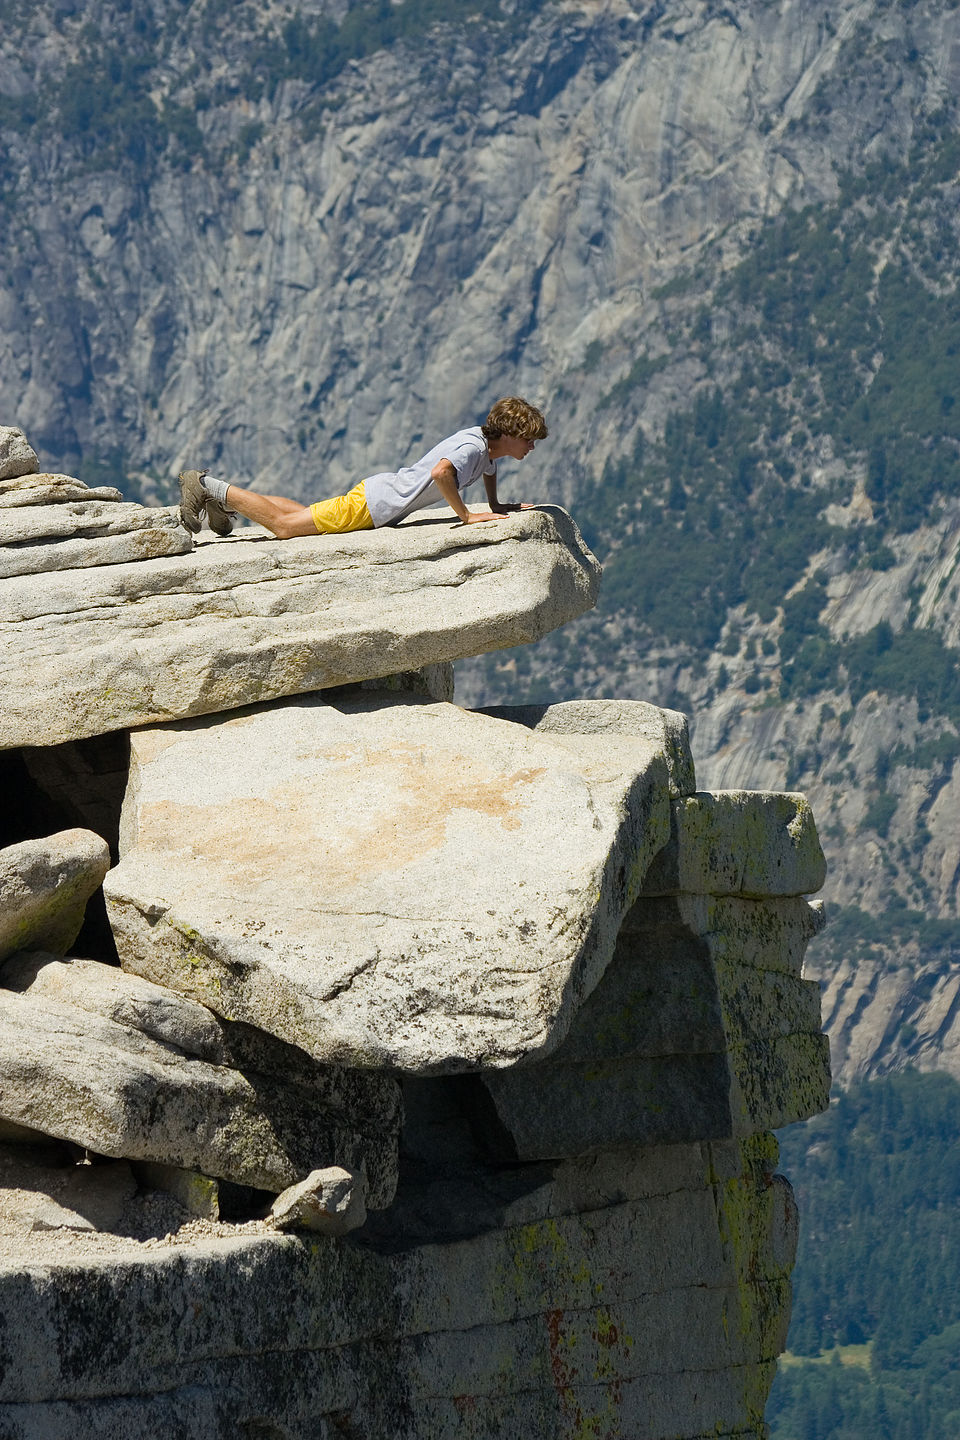 Tommy peering over Half Dome ledge - AJG